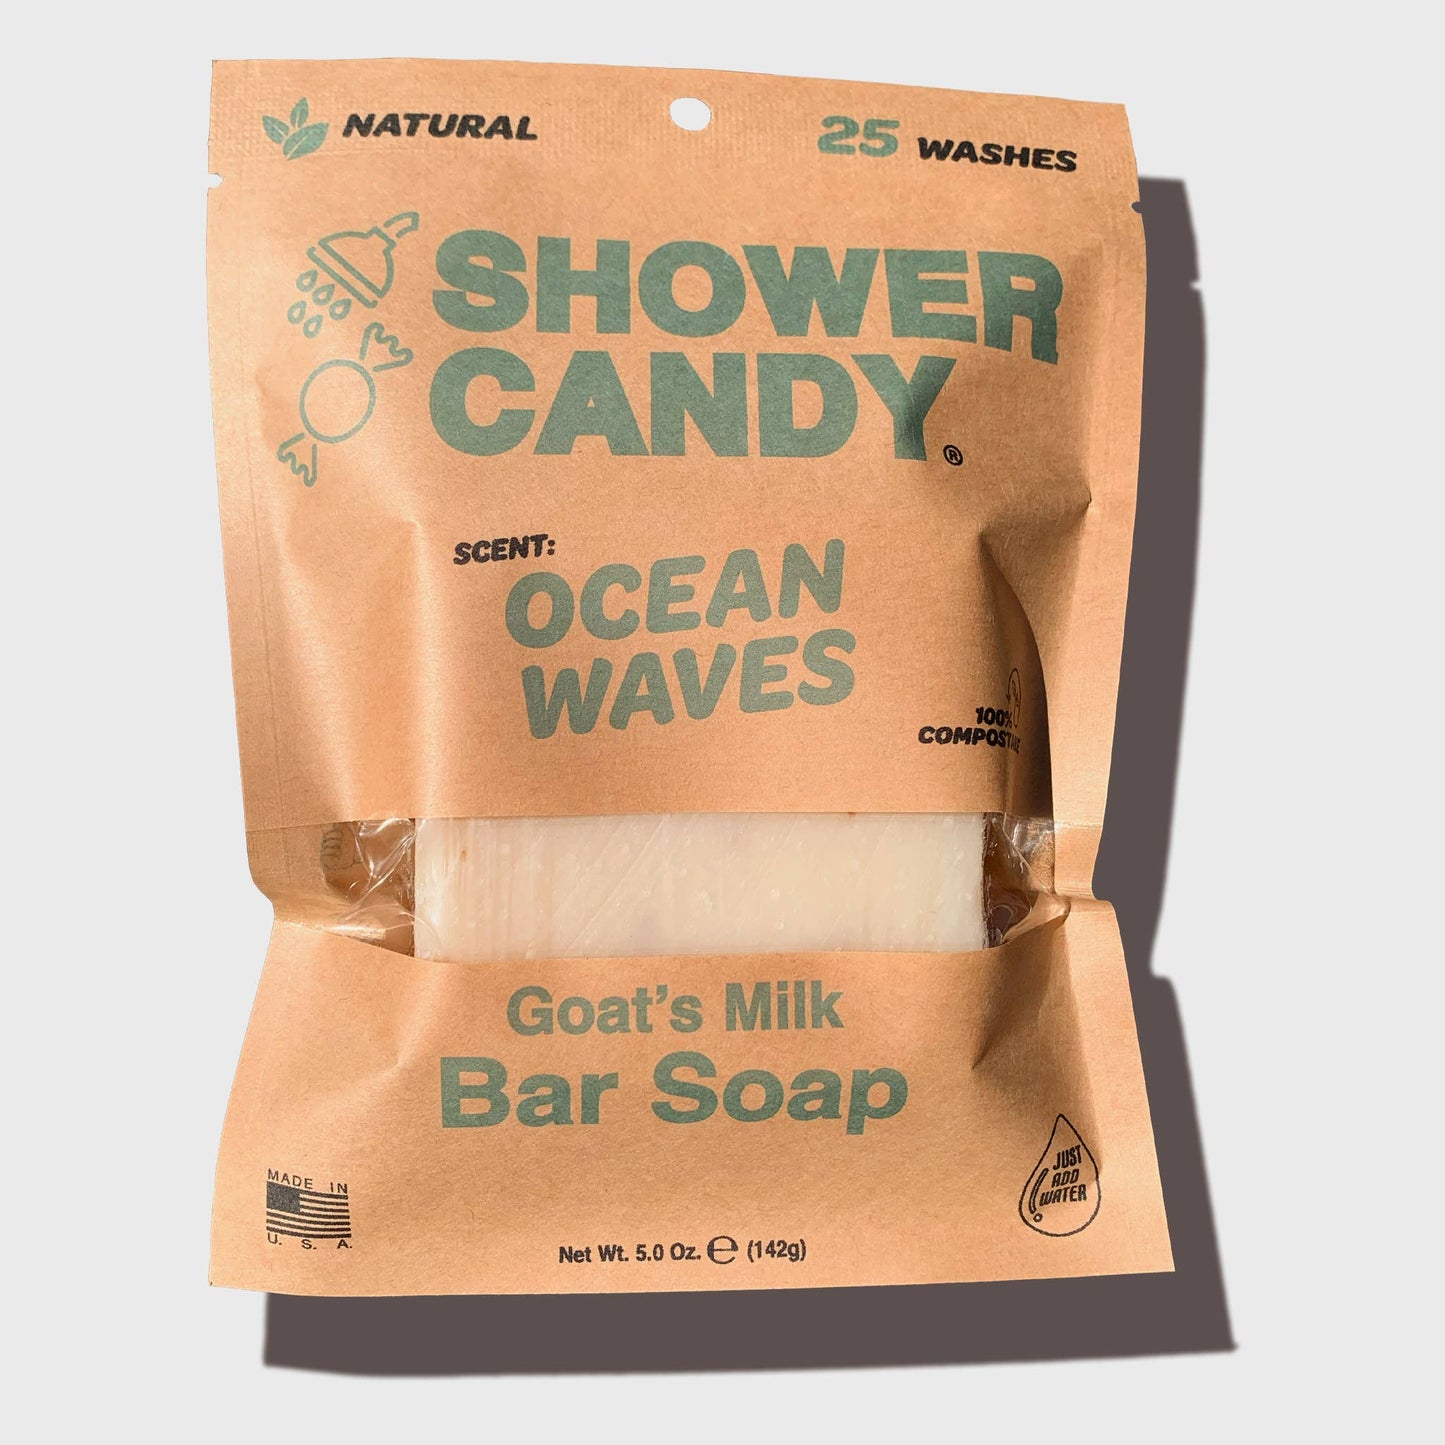 Shower Candy - Ocean Waves Body Wash Bar Soap with Goat's Milk